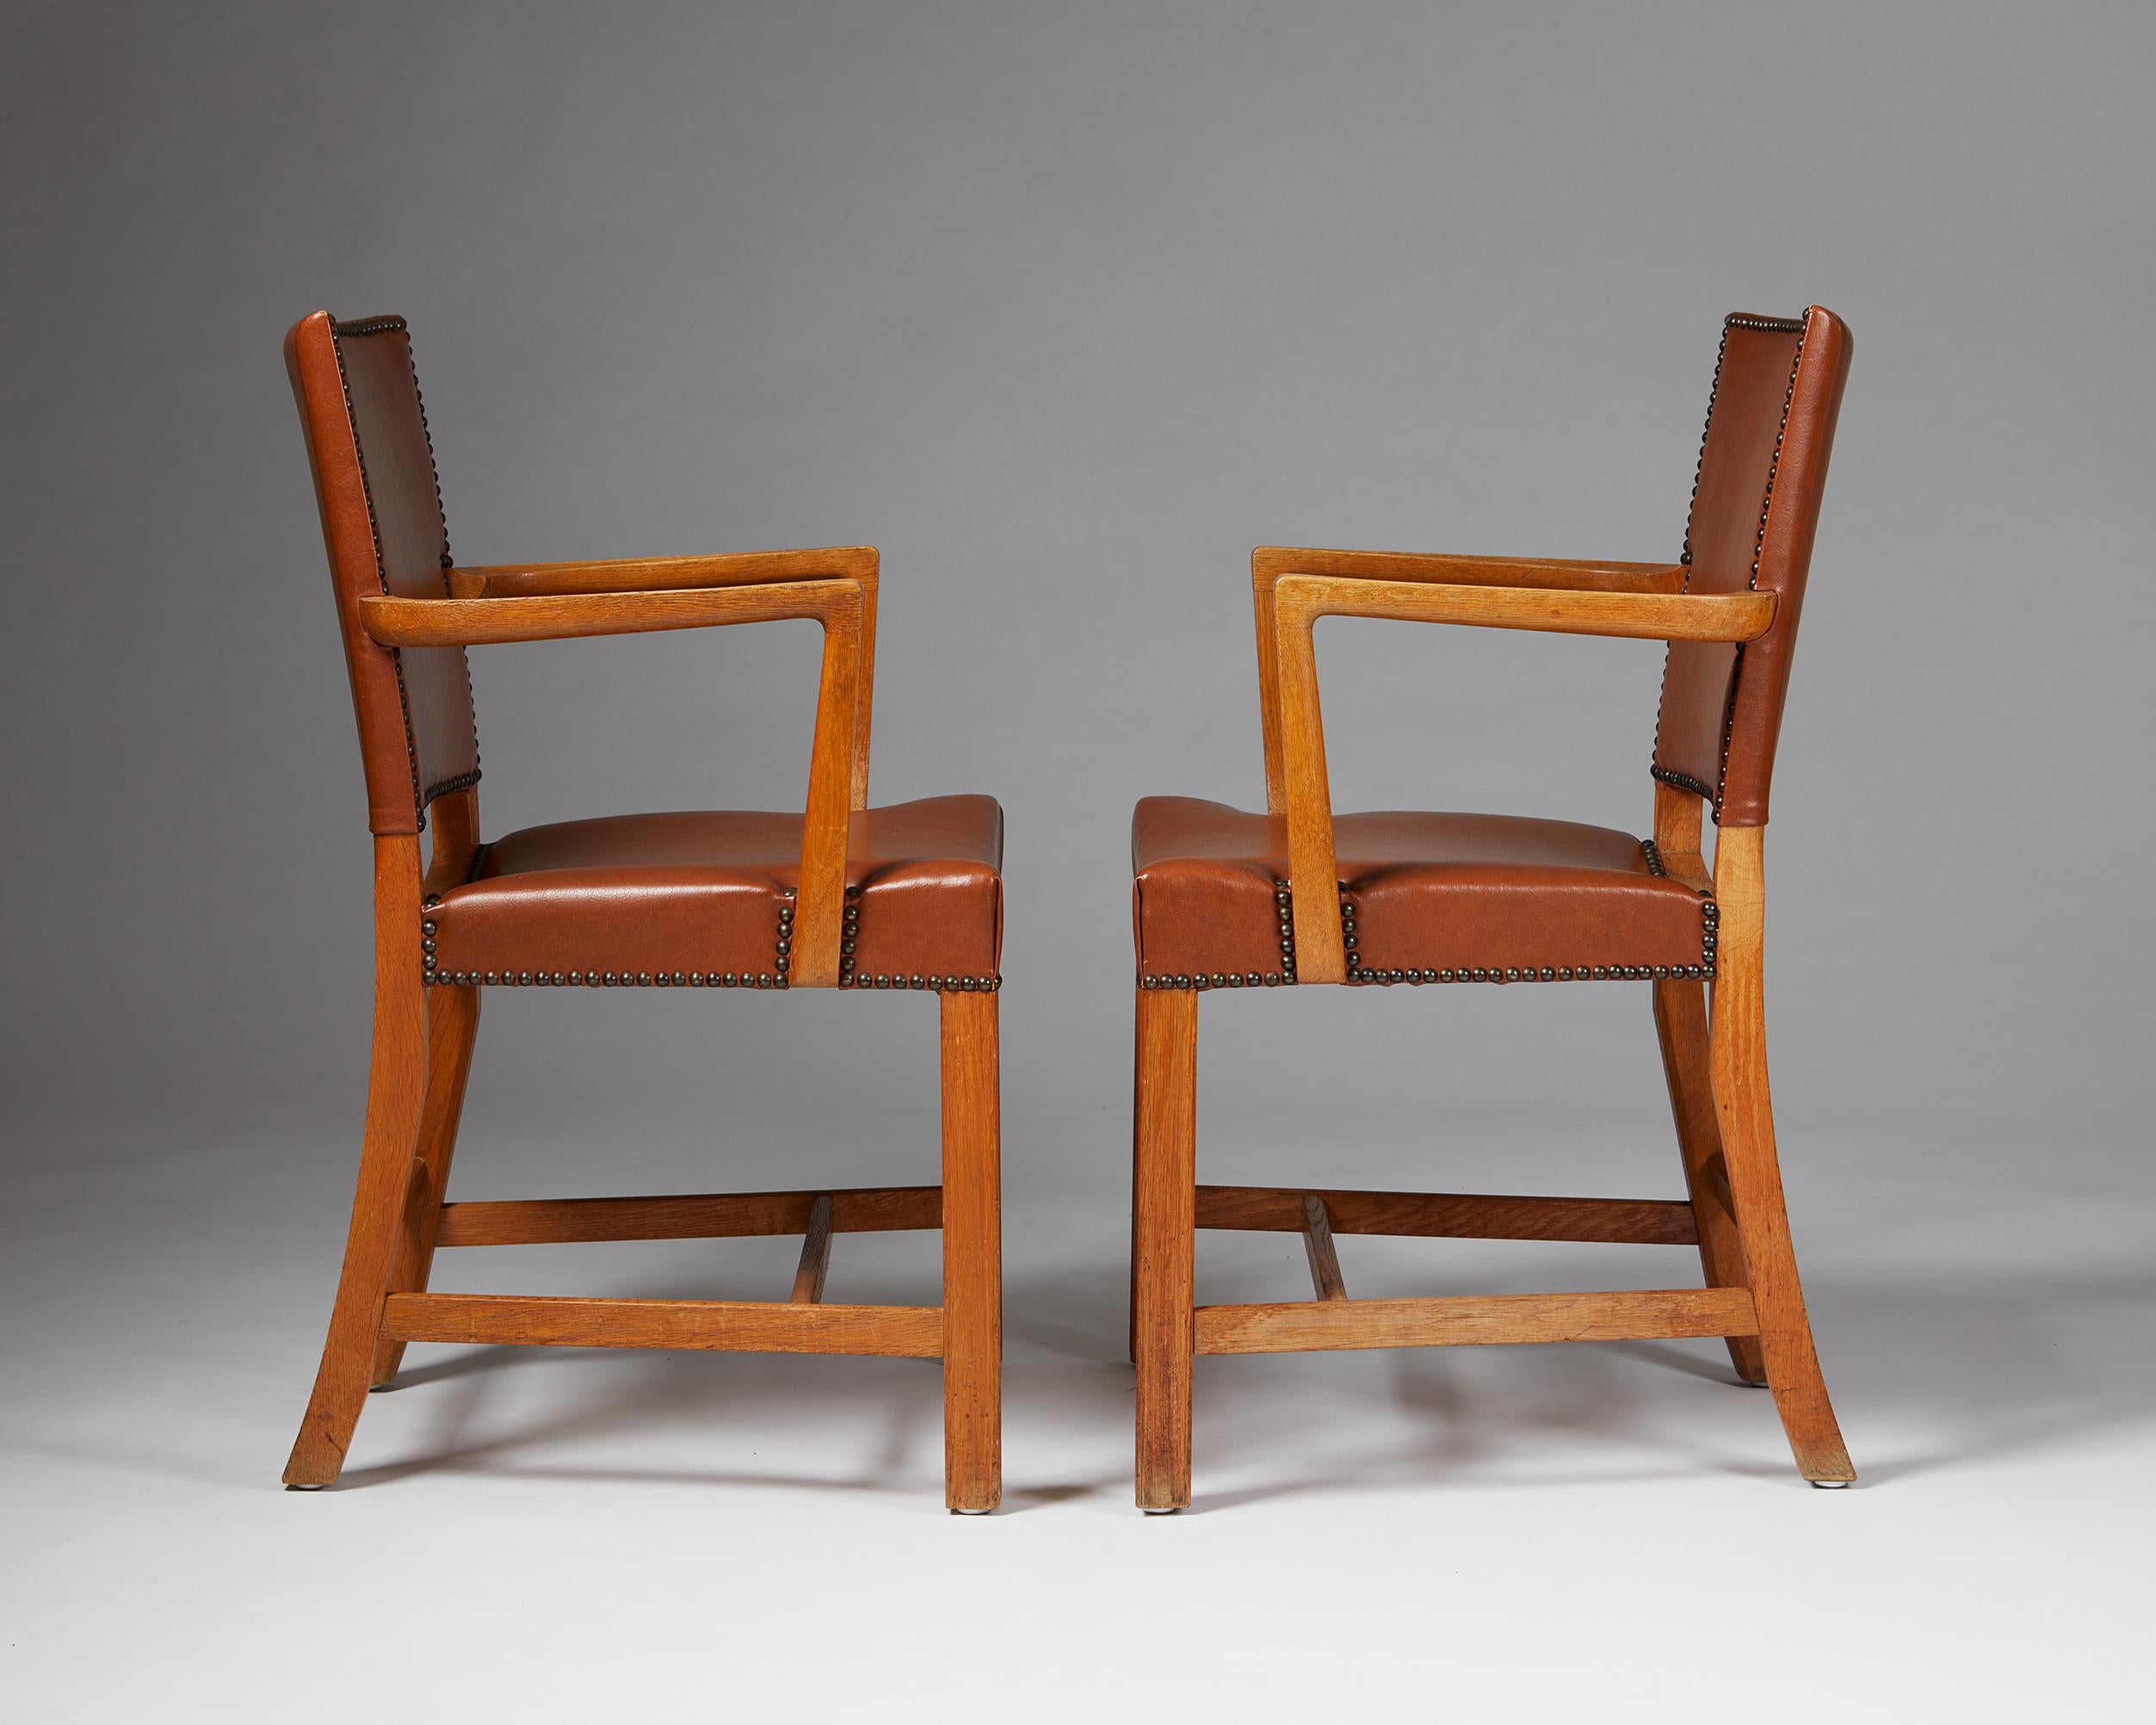 Brass Pair of Armchairs “The Red Chair” Designed by Kaare Klint for Rud. Rasmussen For Sale